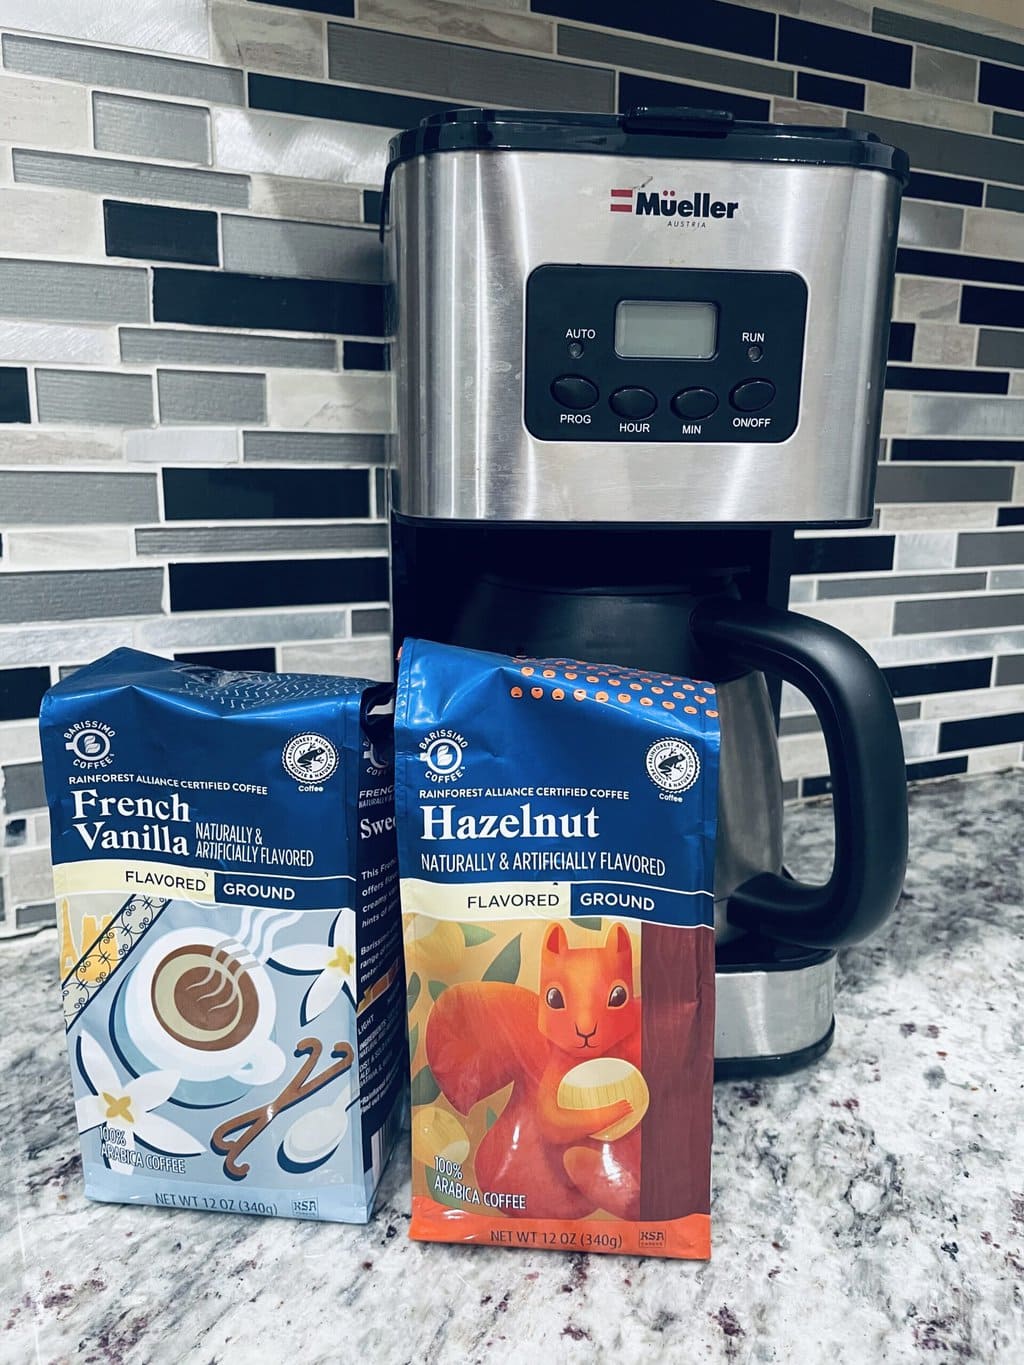 French vanilla and Hazelnut coffee packs from Aldi next to the Mueller coffee maker